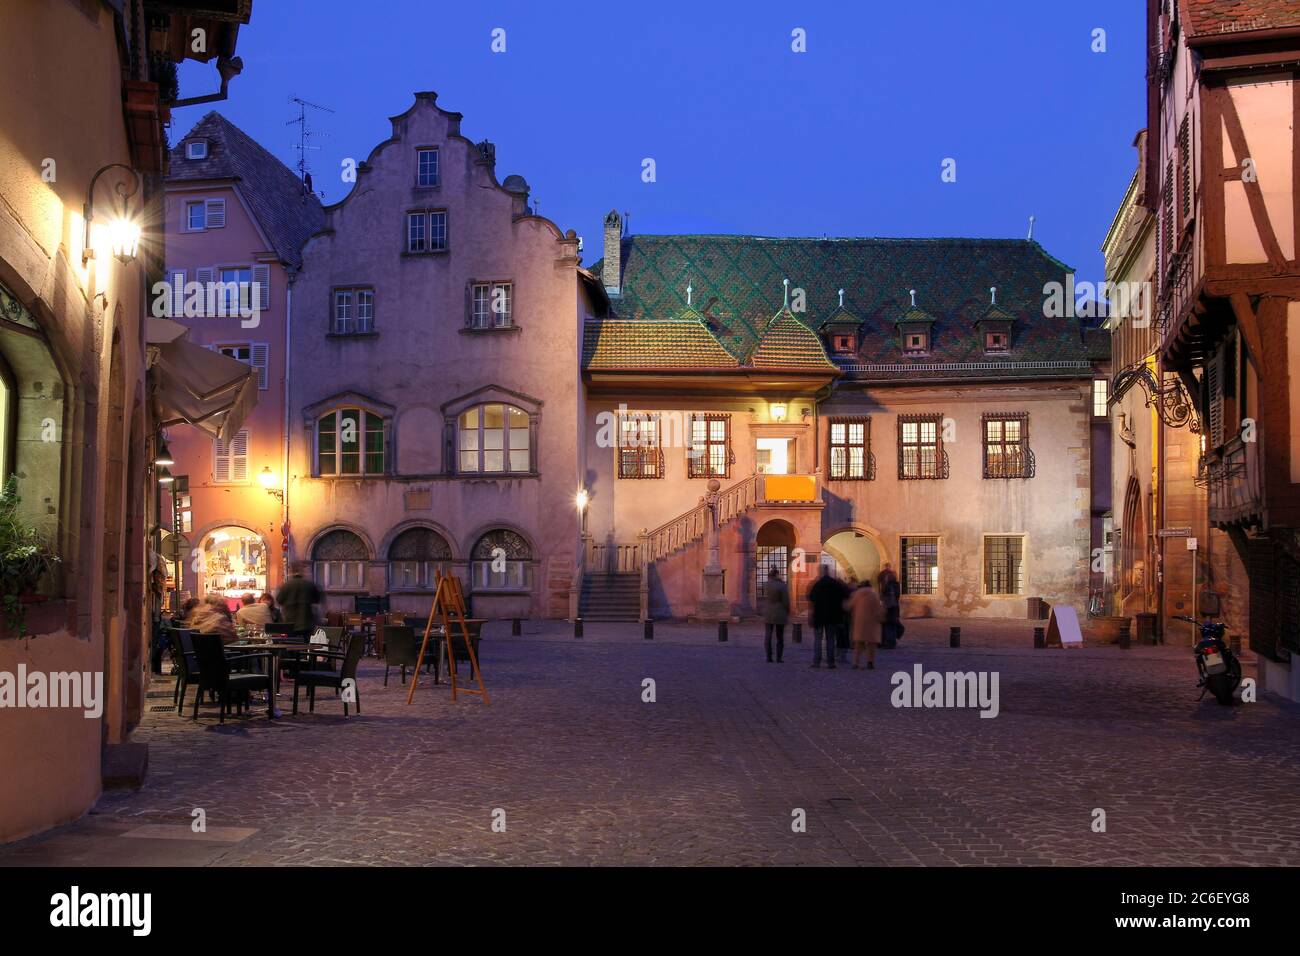 Koifhus or L'Ancienne Douane (Old Custom House) is a historical building in the charming village of Colmar in the Alsace wine region of France. Night Stock Photo